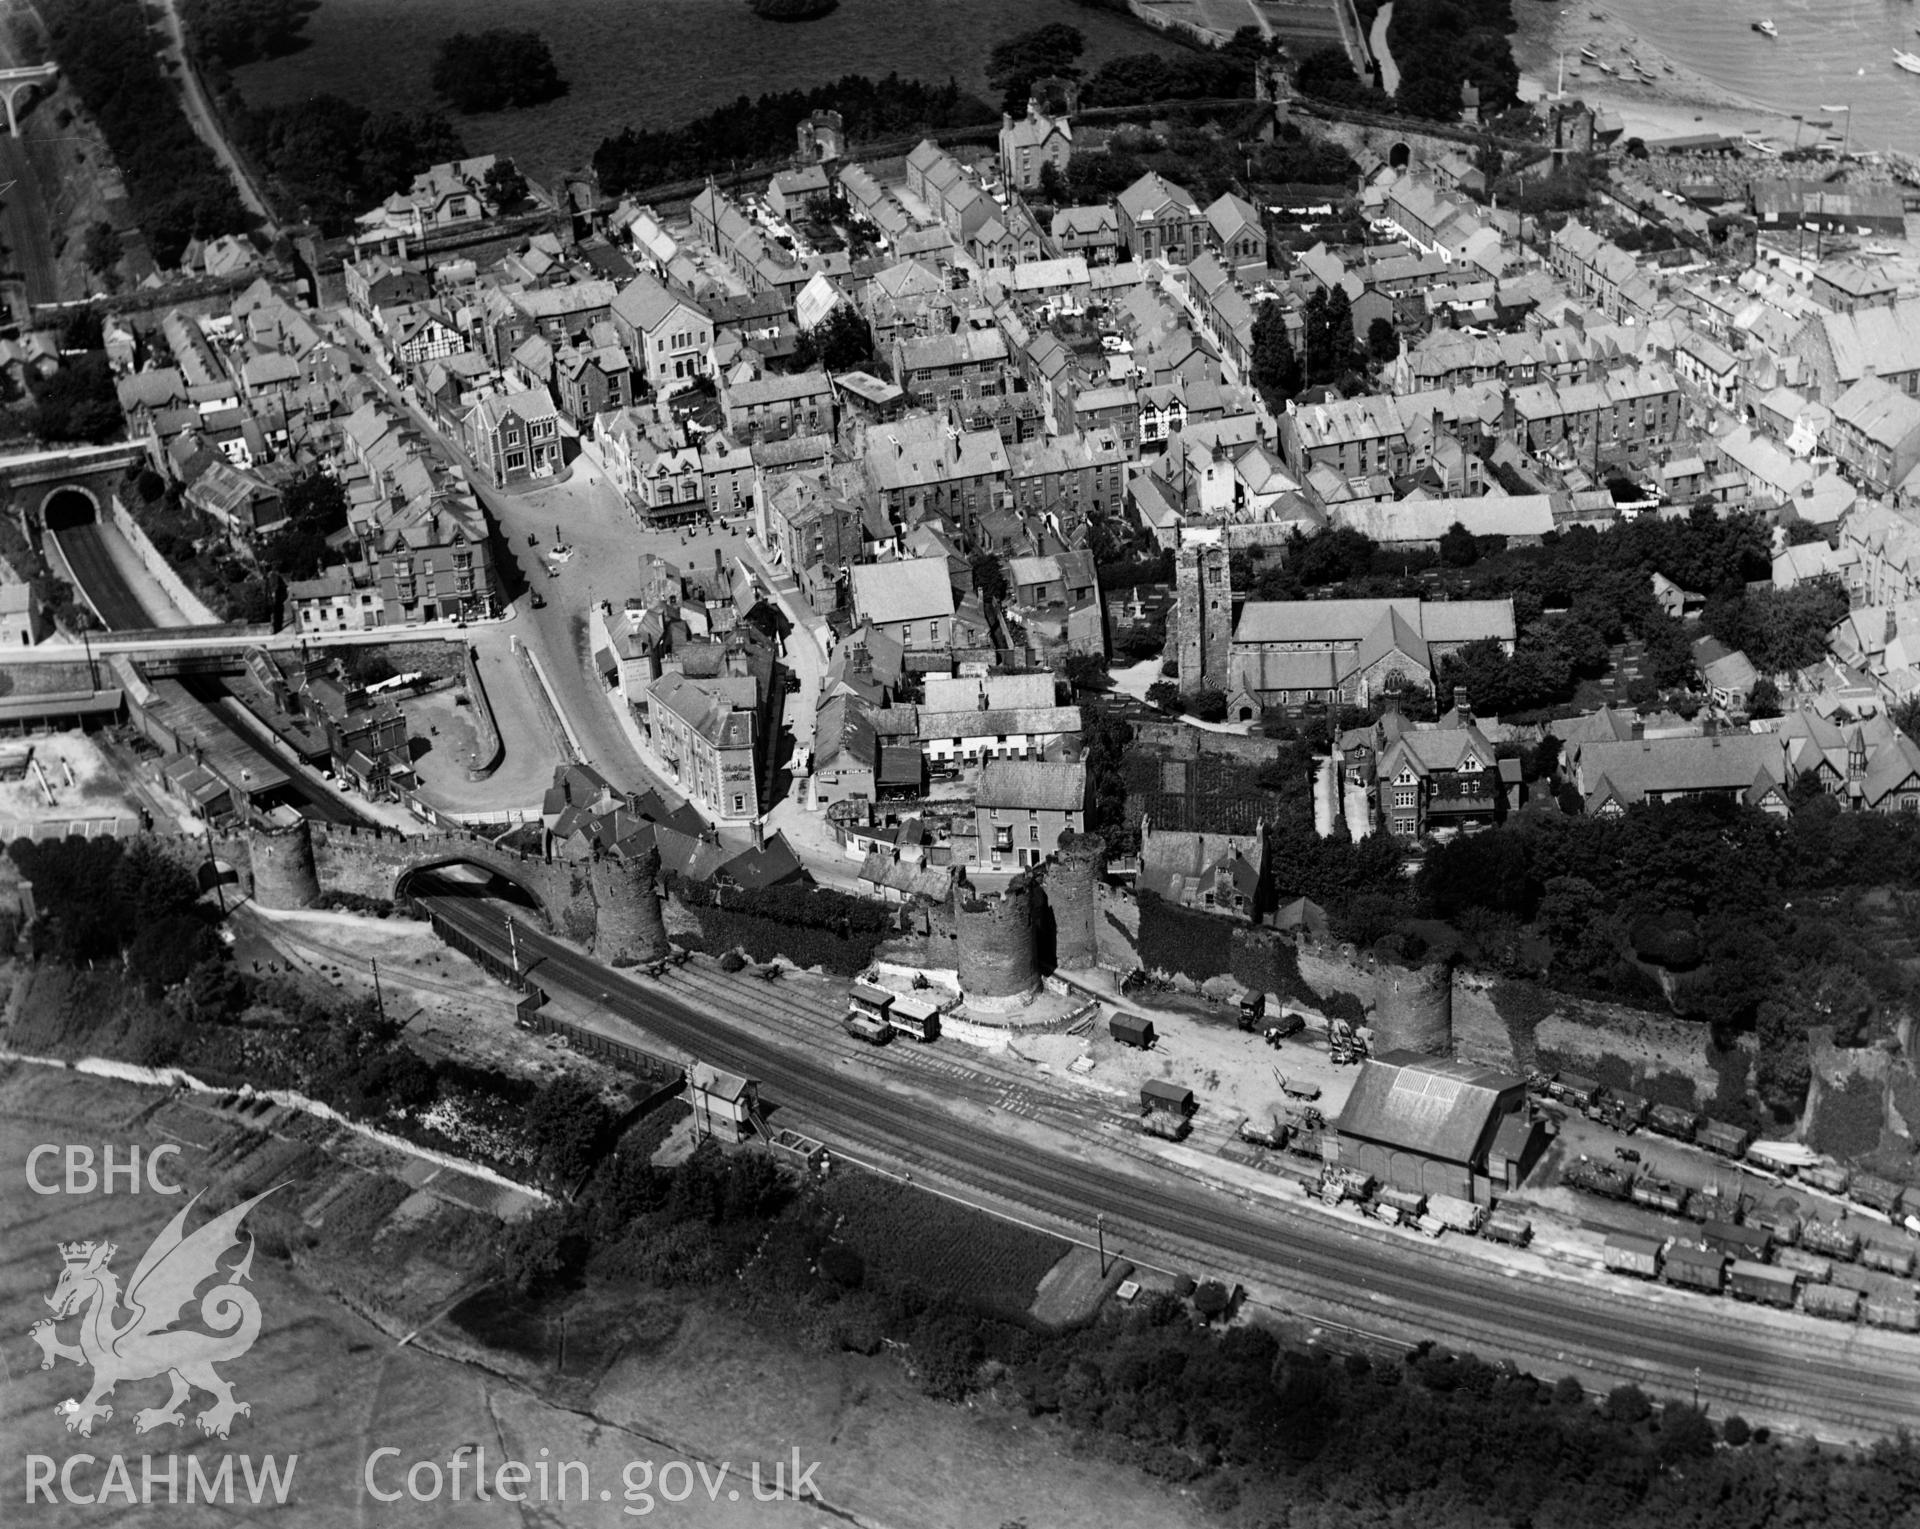 View of Conwy showing town, oblique aerial view. 5?x4? black and white glass plate negative.